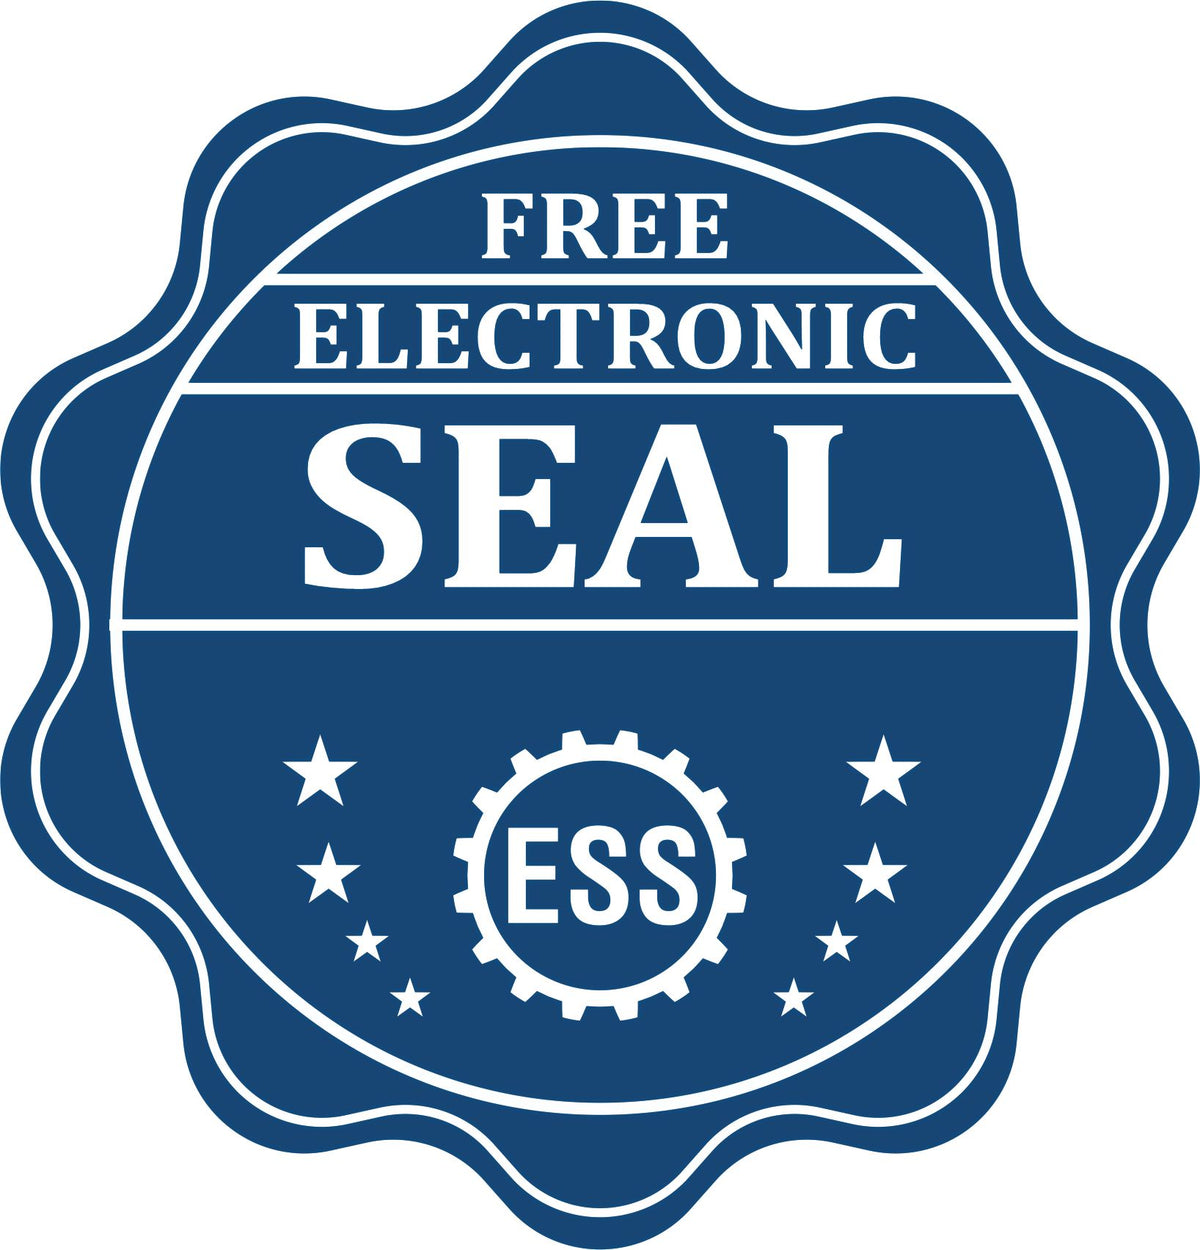 A badge showing a free electronic seal for the Premium MaxLight Pre-Inked Vermont Landscape Architectural Stamp with stars and the ESS gear on the emblem.